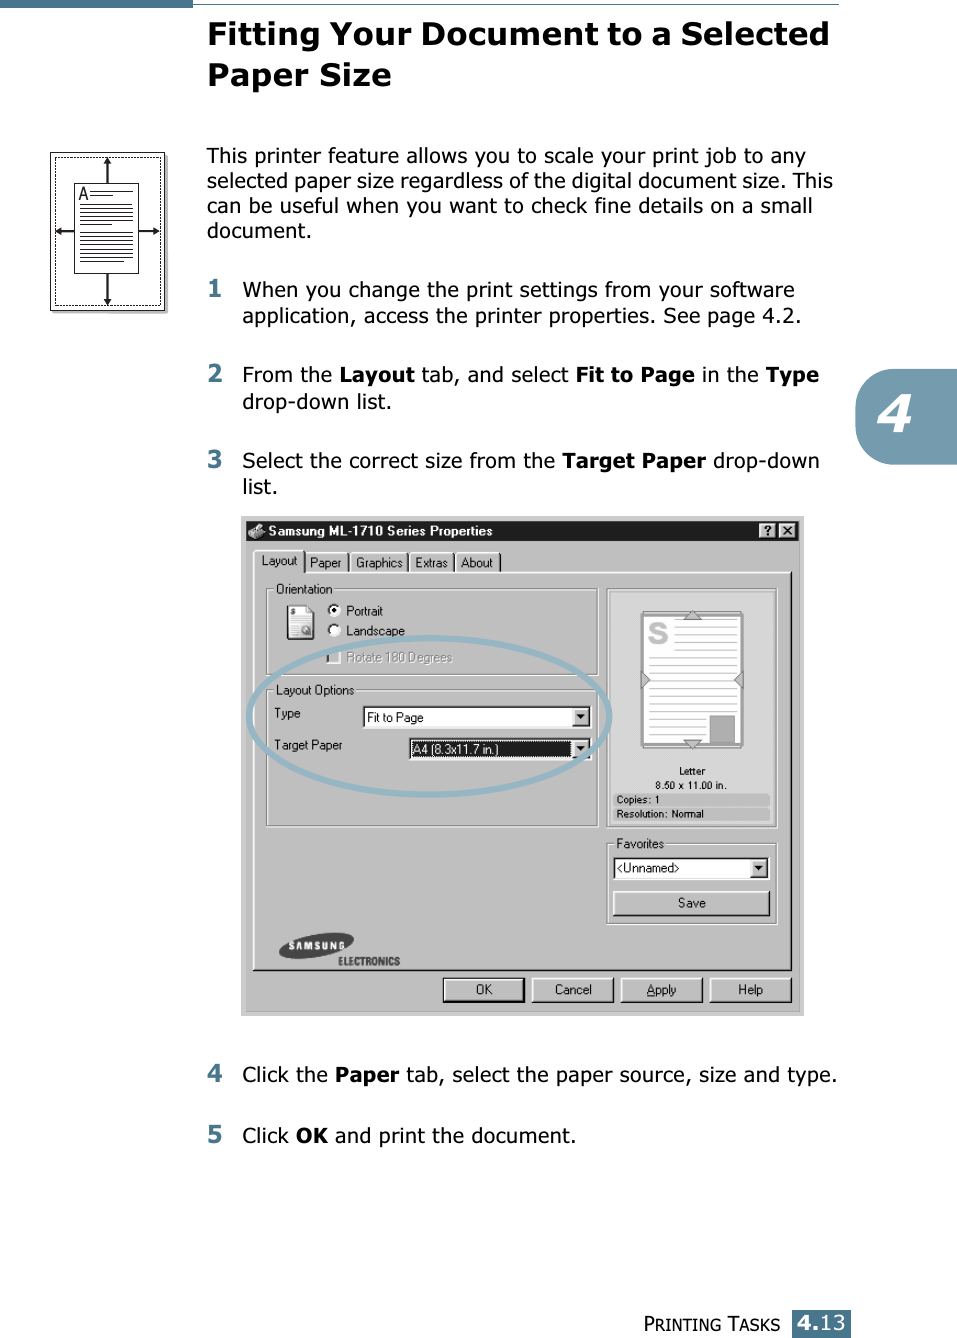 PRINTING TASKS4.134Fitting Your Document to a Selected Paper SizeThis printer feature allows you to scale your print job to any selected paper size regardless of the digital document size. This can be useful when you want to check fine details on a small document. 1When you change the print settings from your software application, access the printer properties. See page 4.2.2From the Layout tab, and select Fit to Page in the Type drop-down list. 3Select the correct size from the Target Paper drop-down list.4Click the Paper tab, select the paper source, size and type.5Click OK and print the document.A